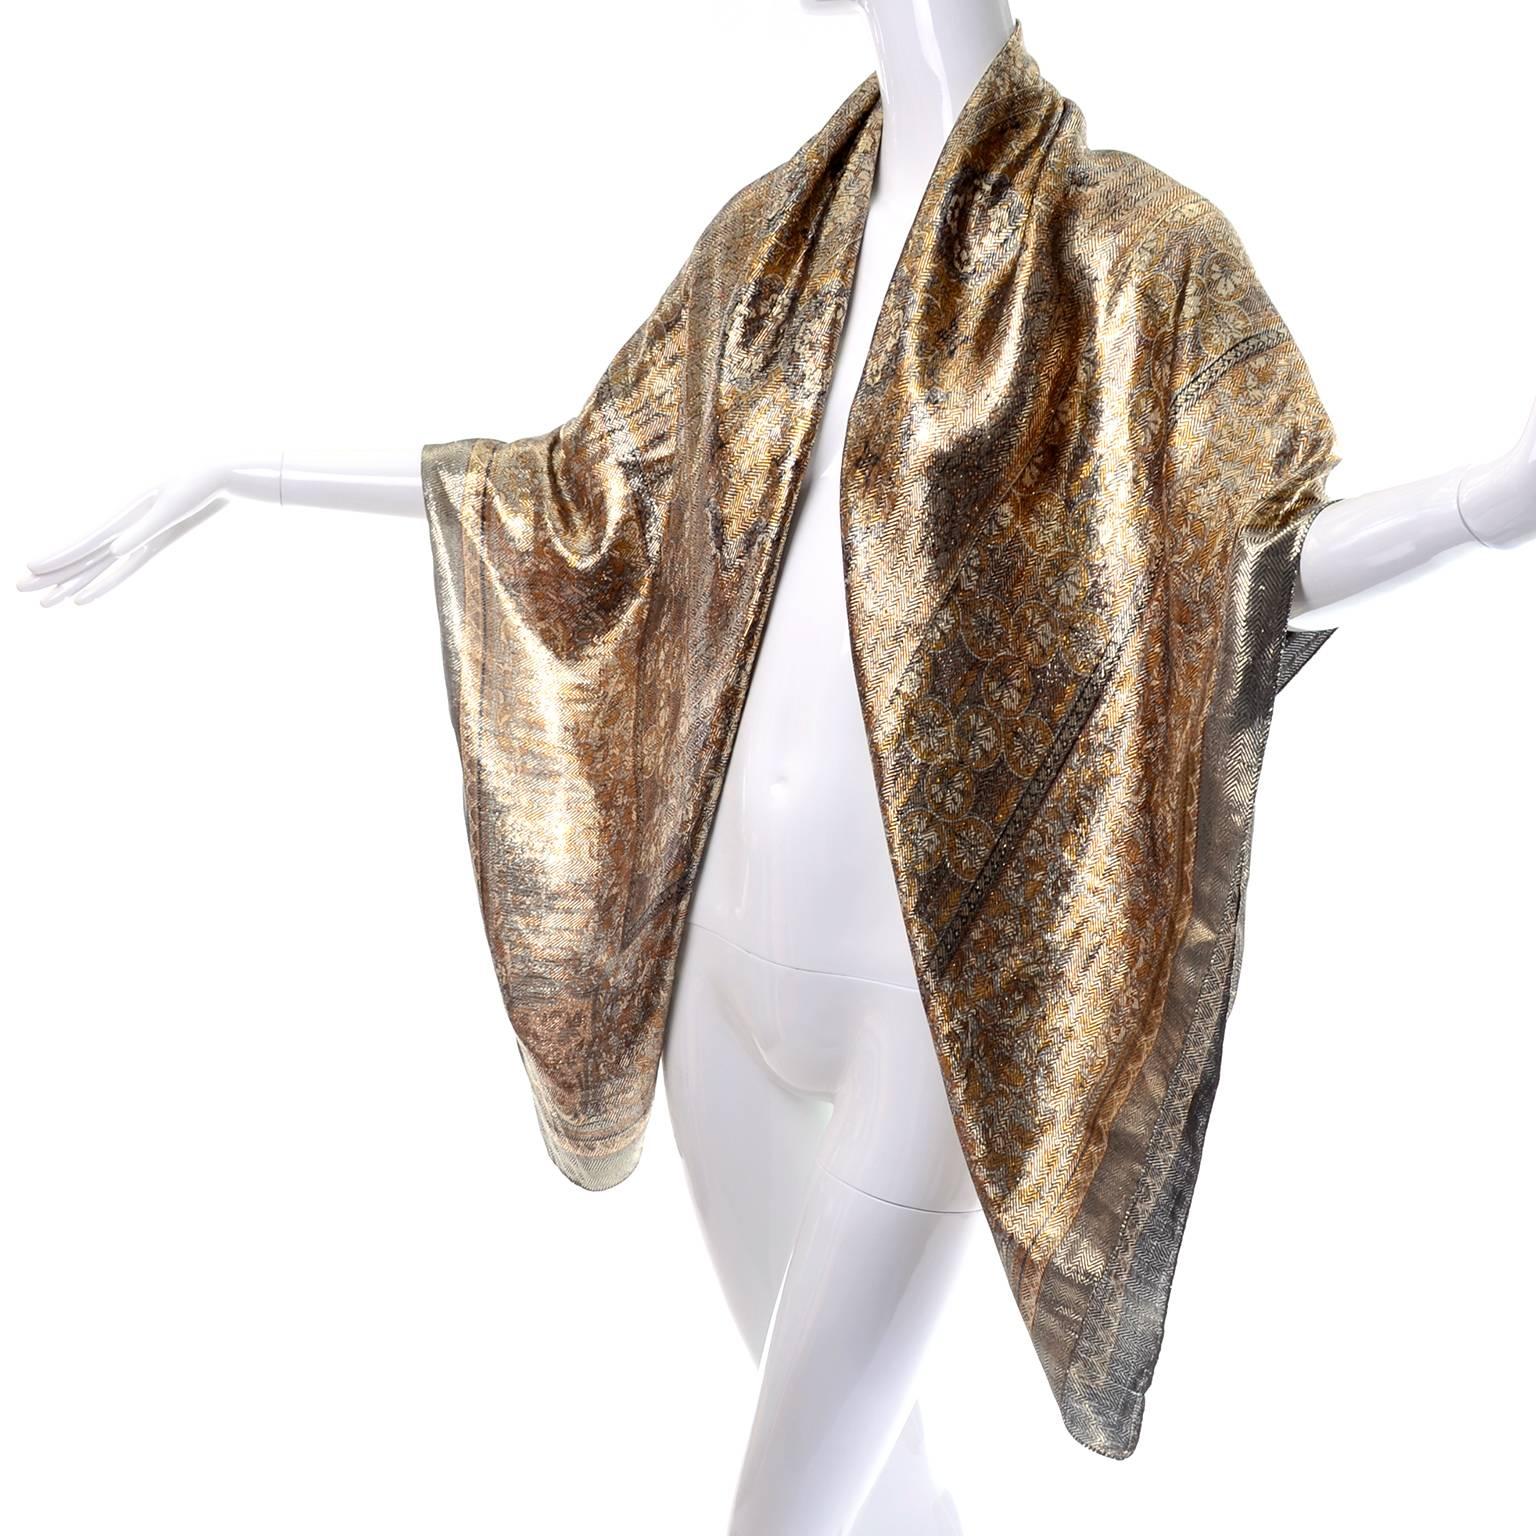 This sensation luxe large square metallic scarf is really stunning in person. The scarf comes from an estate of high end designer clothing and accessories but has no labels remaining. 
The gorgeous weaving creates a metallic chevron pattern across